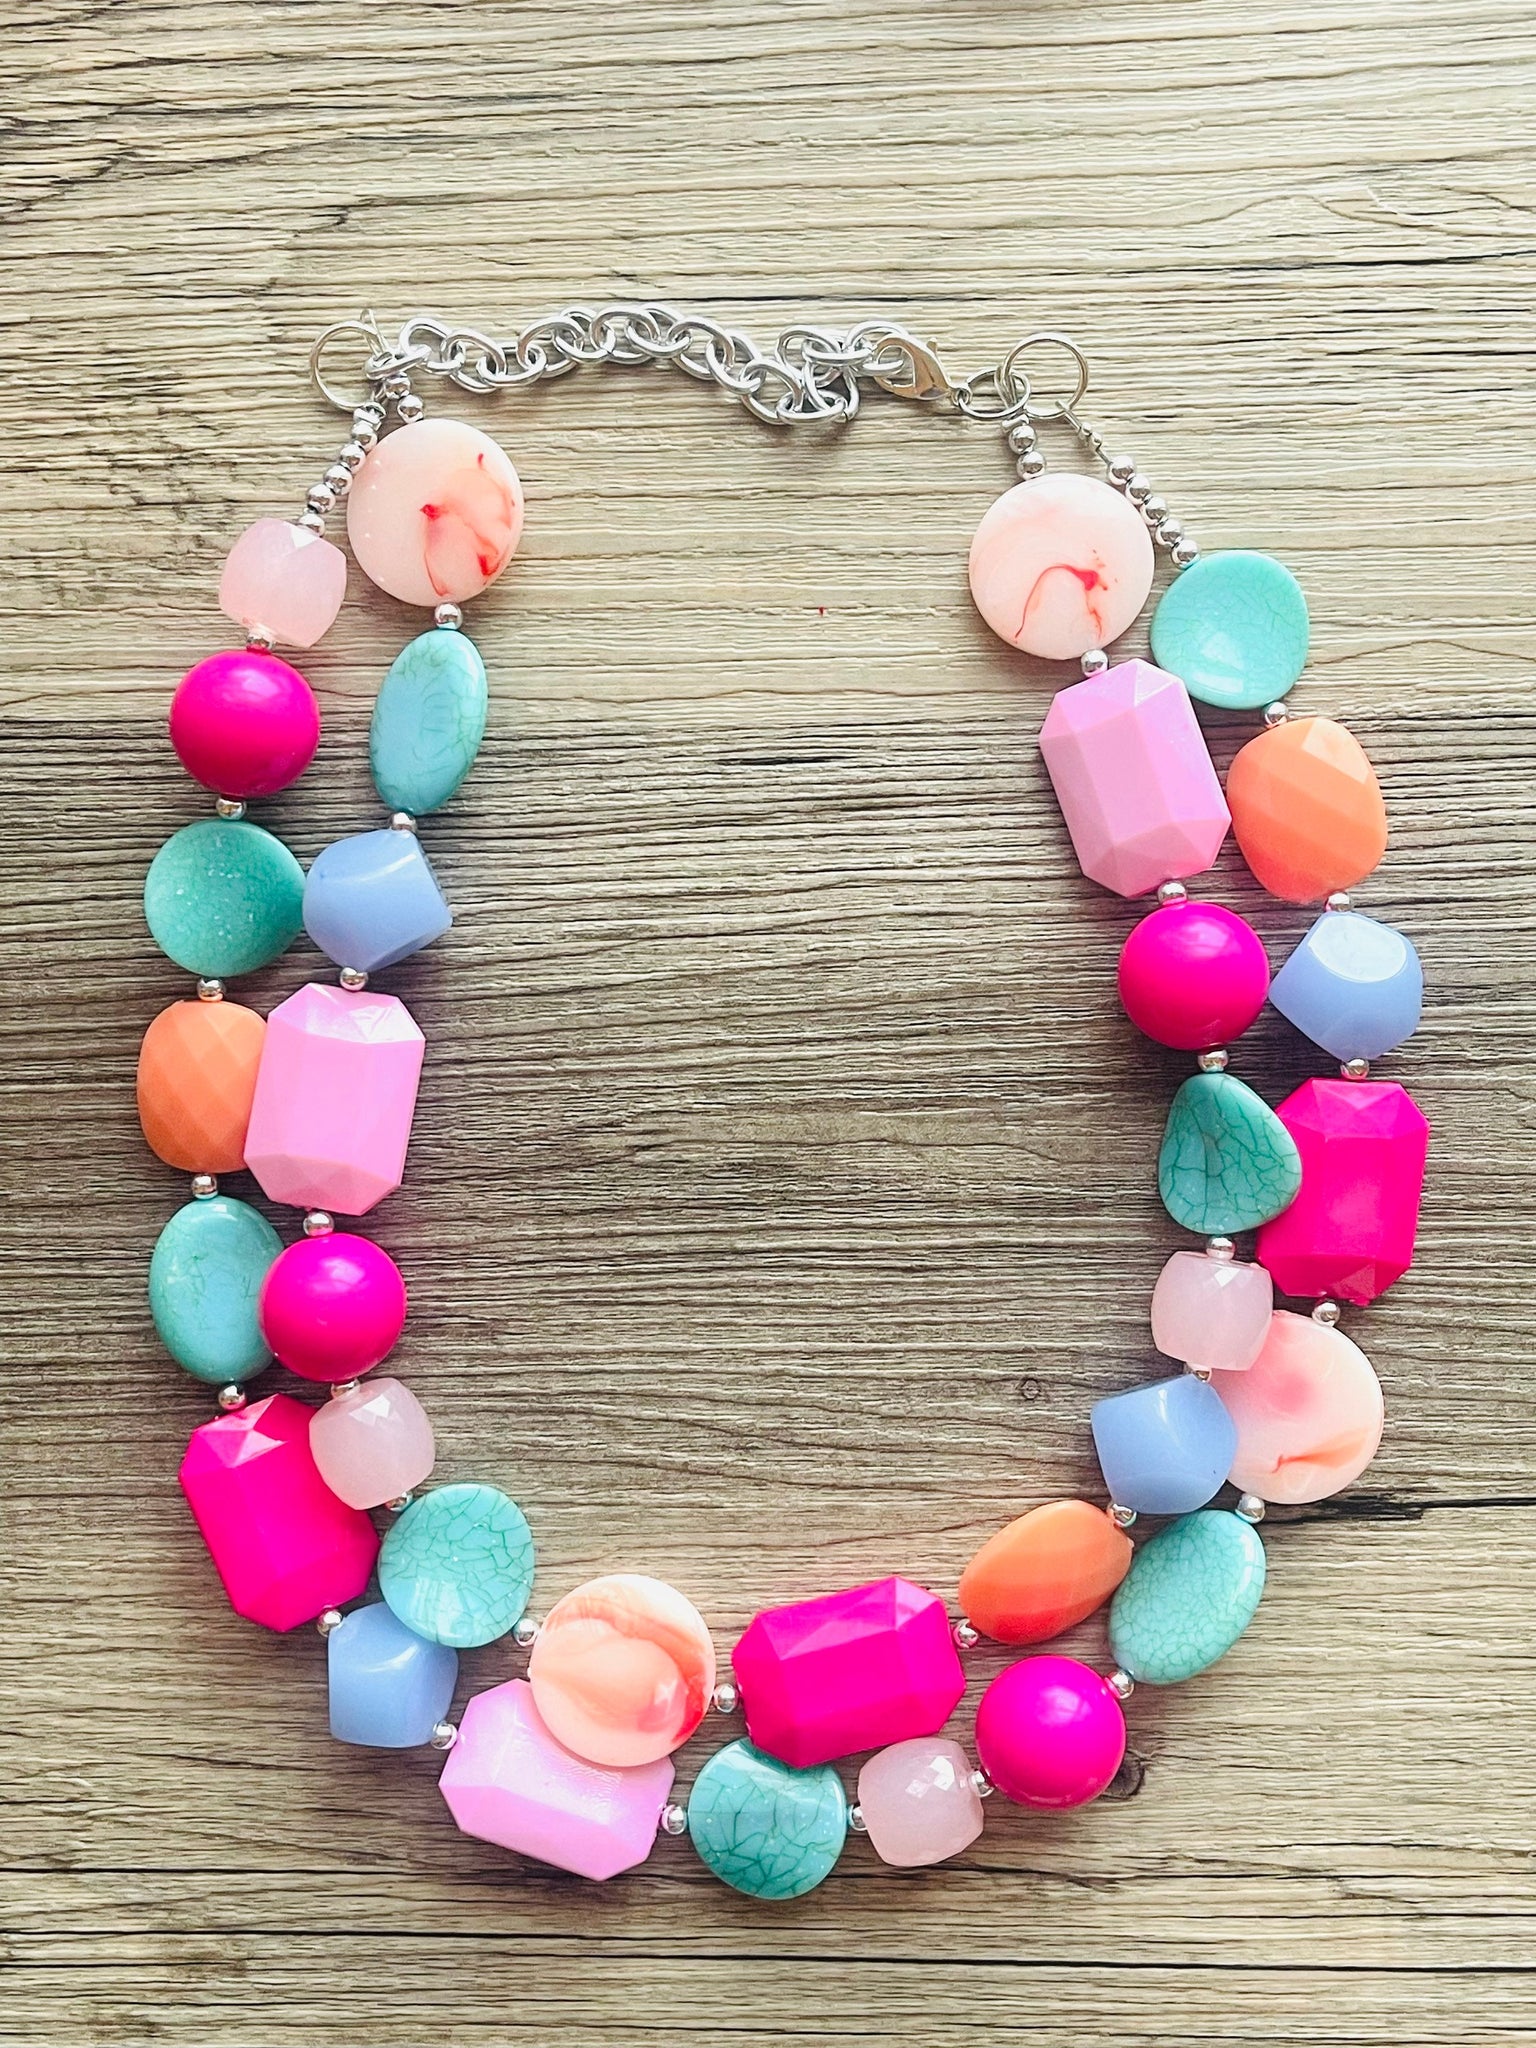 Retro Pink Statement Necklace | Rathana Suy | Flickr